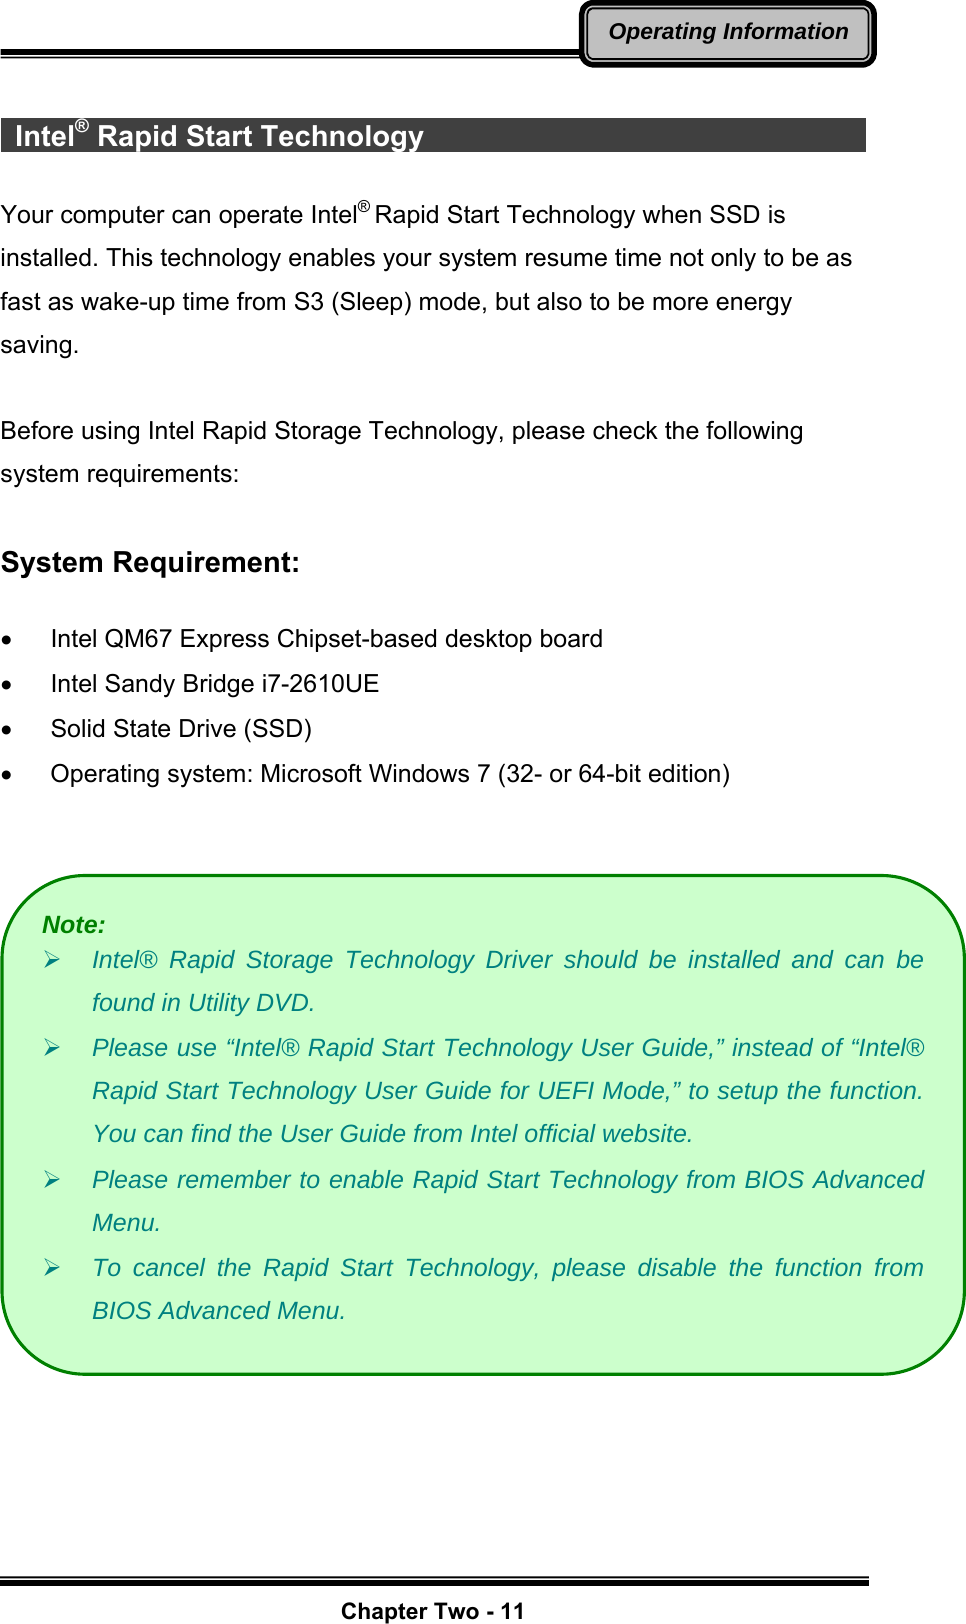   Chapter Two - 11Operating Information  Intel® Rapid Start Technology                                       Your computer can operate Intel® Rapid Start Technology when SSD is installed. This technology enables your system resume time not only to be as fast as wake-up time from S3 (Sleep) mode, but also to be more energy saving.   Before using Intel Rapid Storage Technology, please check the following system requirements:  System Requirement:  •  Intel QM67 Express Chipset-based desktop board •  Intel Sandy Bridge i7-2610UE •  Solid State Drive (SSD) •  Operating system: Microsoft Windows 7 (32- or 64-bit edition)     Note: ¾ Intel® Rapid Storage Technology Driver should be installed and can be found in Utility DVD. ¾ Please use “Intel® Rapid Start Technology User Guide,” instead of “Intel® Rapid Start Technology User Guide for UEFI Mode,” to setup the function. You can find the User Guide from Intel official website. ¾ Please remember to enable Rapid Start Technology from BIOS Advanced Menu. ¾ To cancel the Rapid Start Technology, please disable the function from BIOS Advanced Menu. 